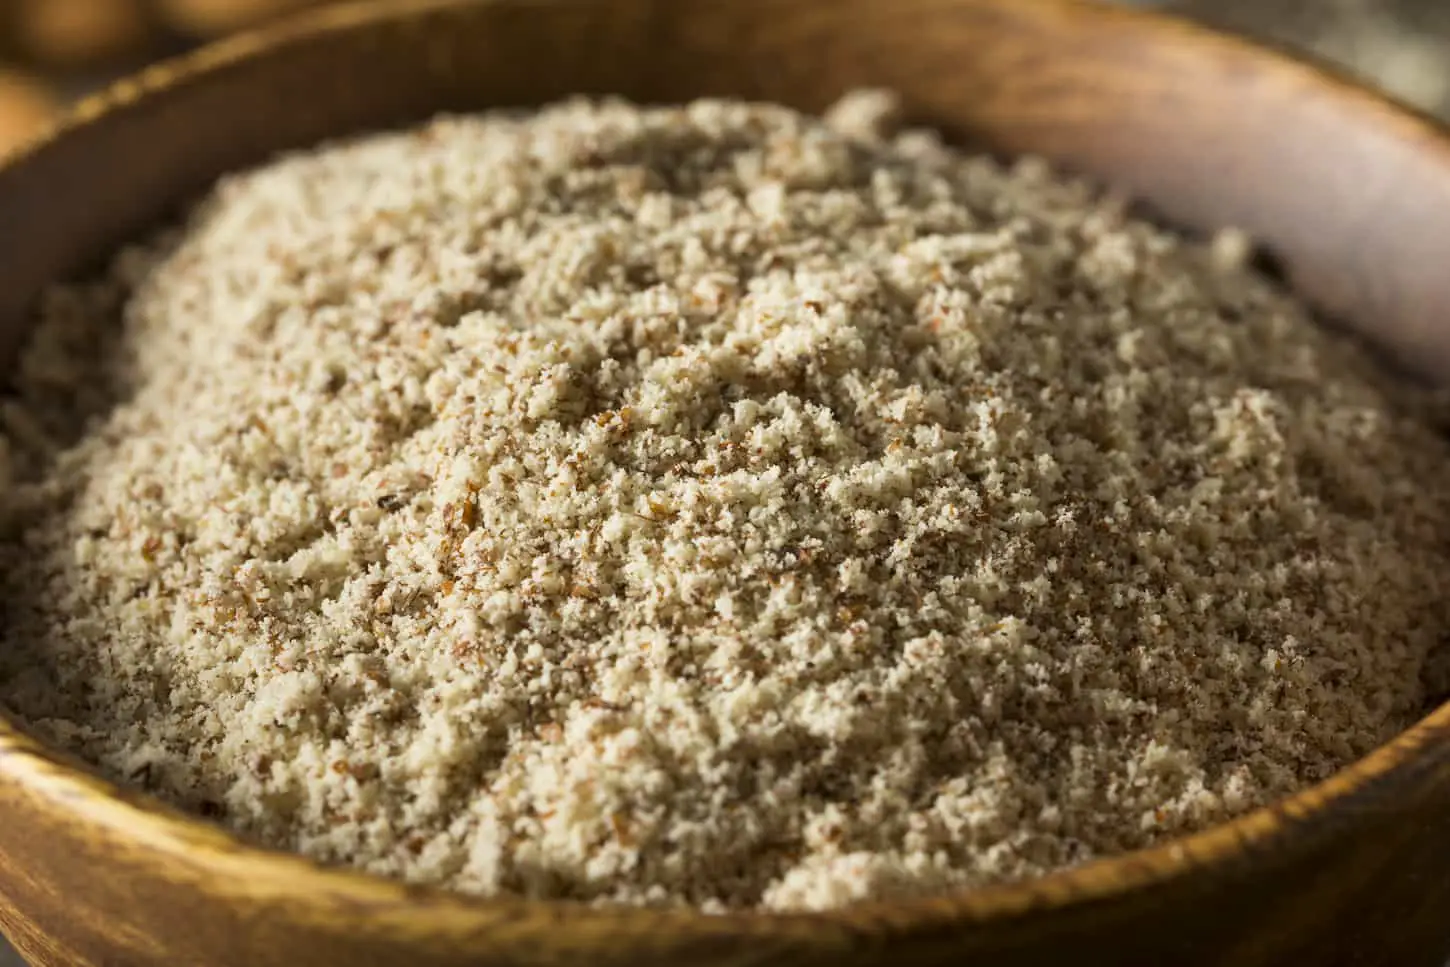 An image of Raw Organic Almond Flour in a Bowl.